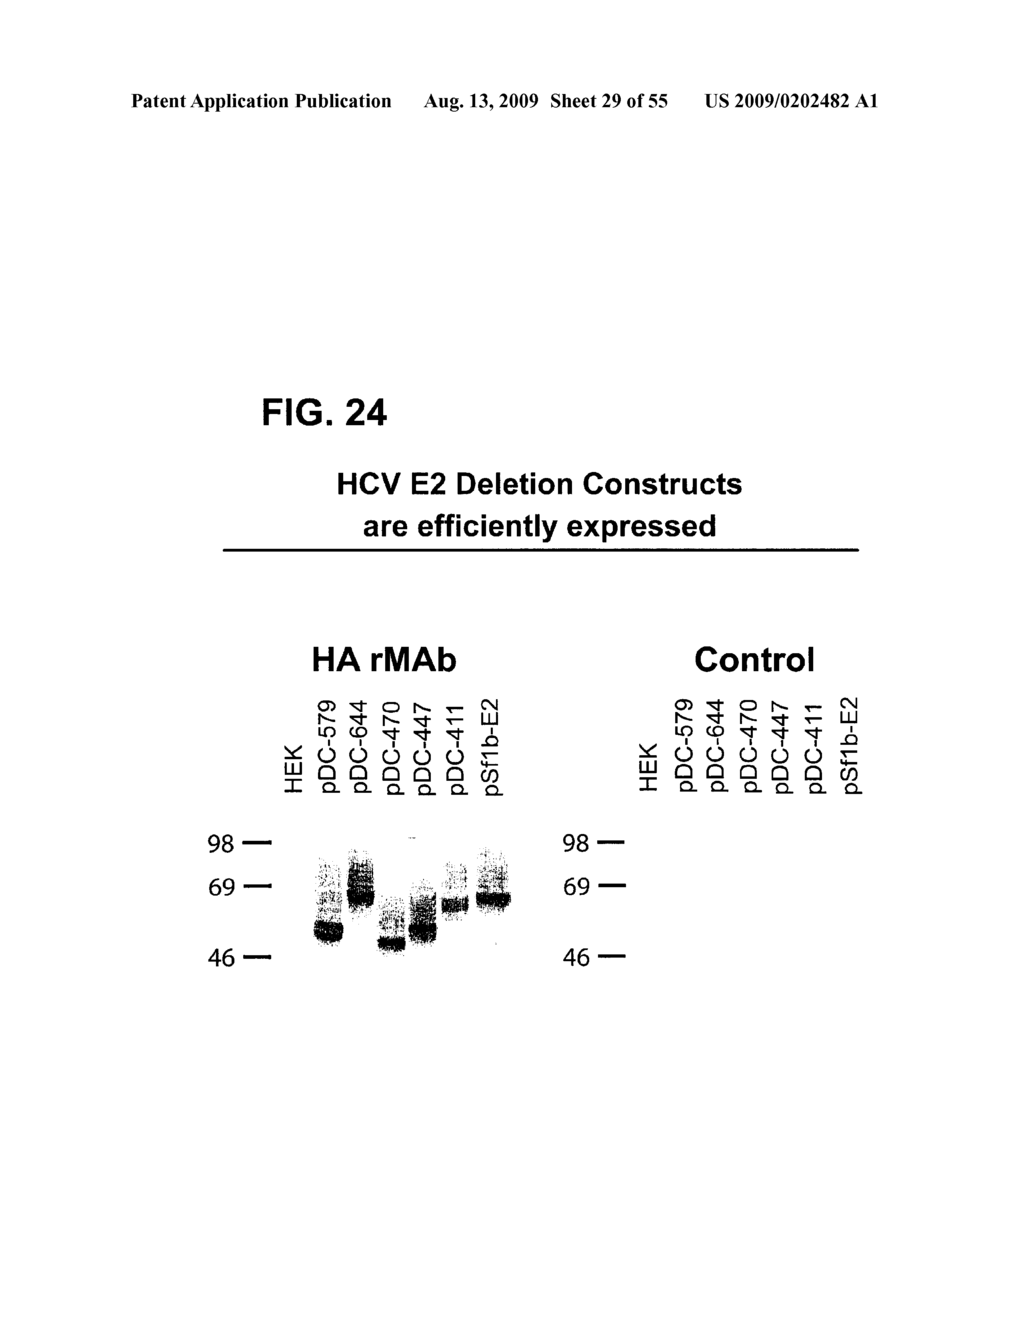 Prevention and Treatment of HCV Infection Employing Antibodies Directed Against Conformational and Linear Epitopes - diagram, schematic, and image 30